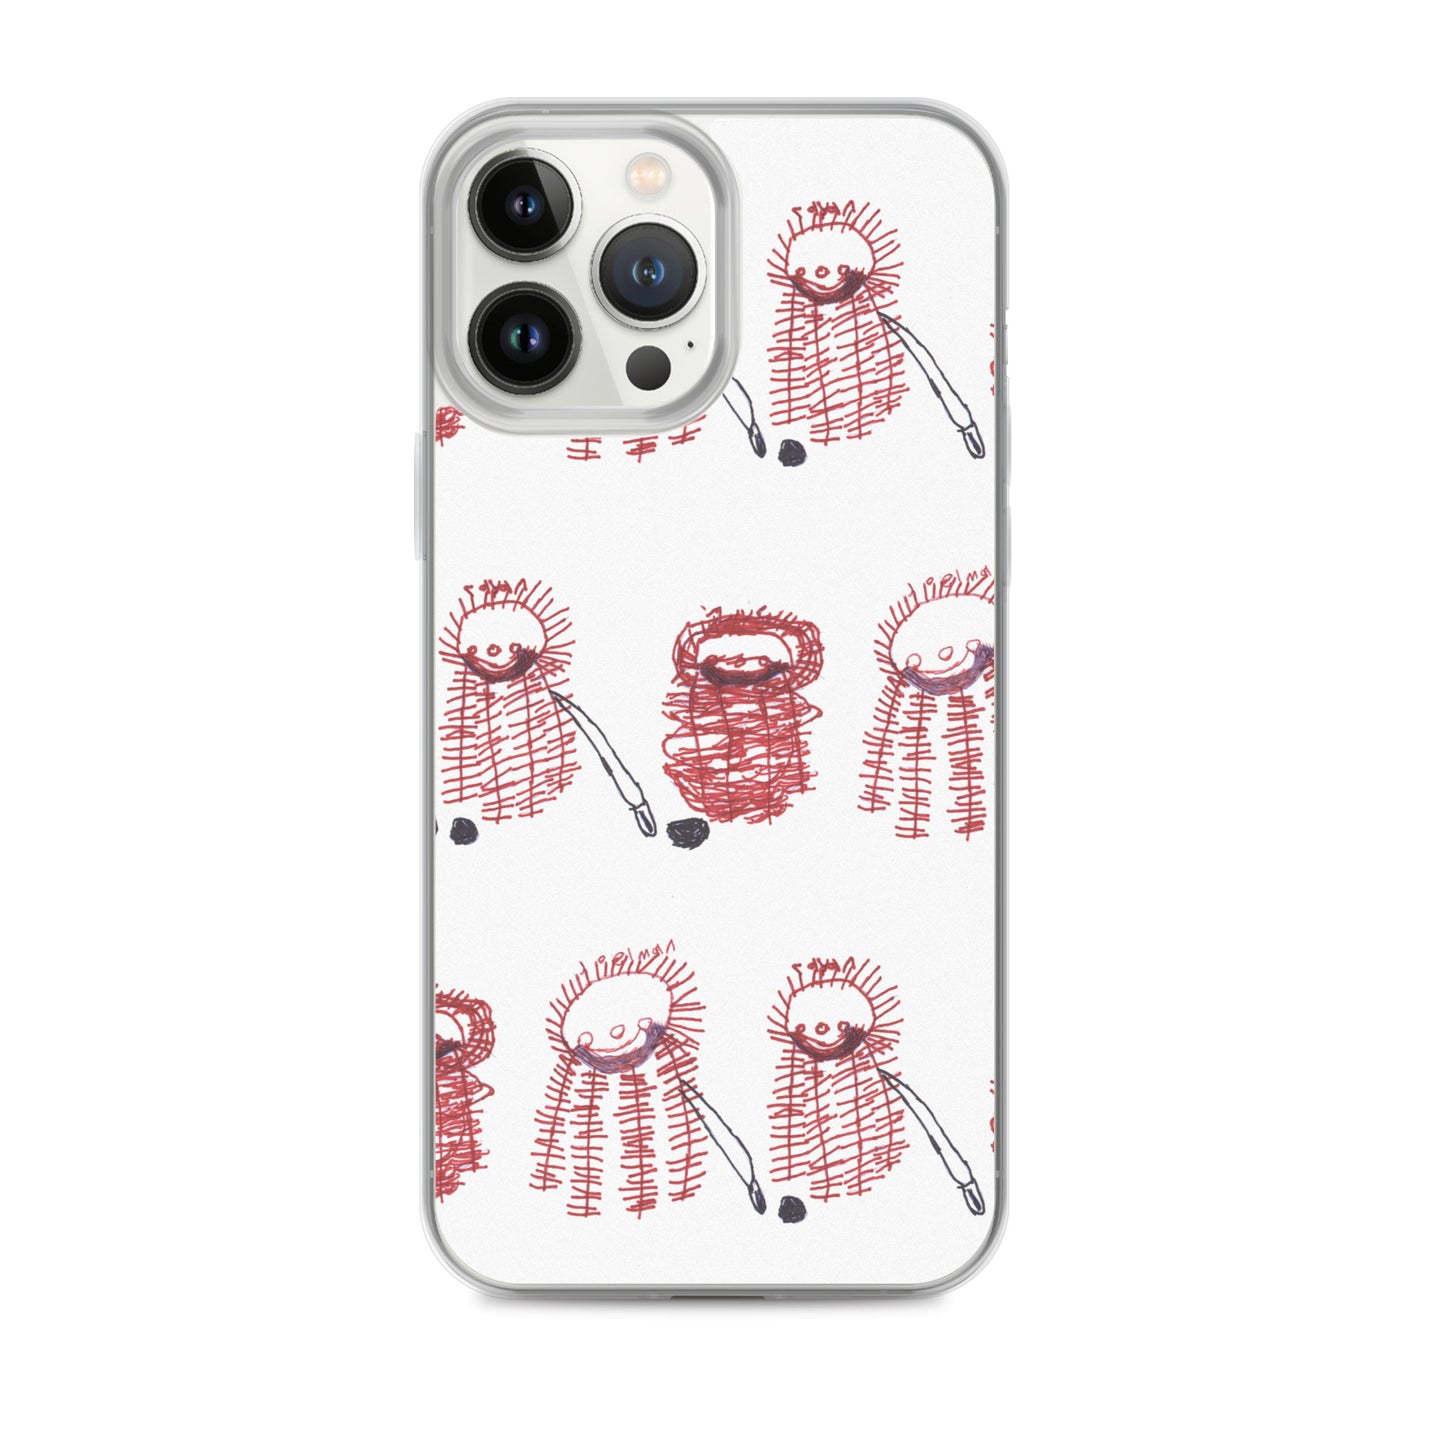 iPhone Case - "Playing Hockey with the Condors"